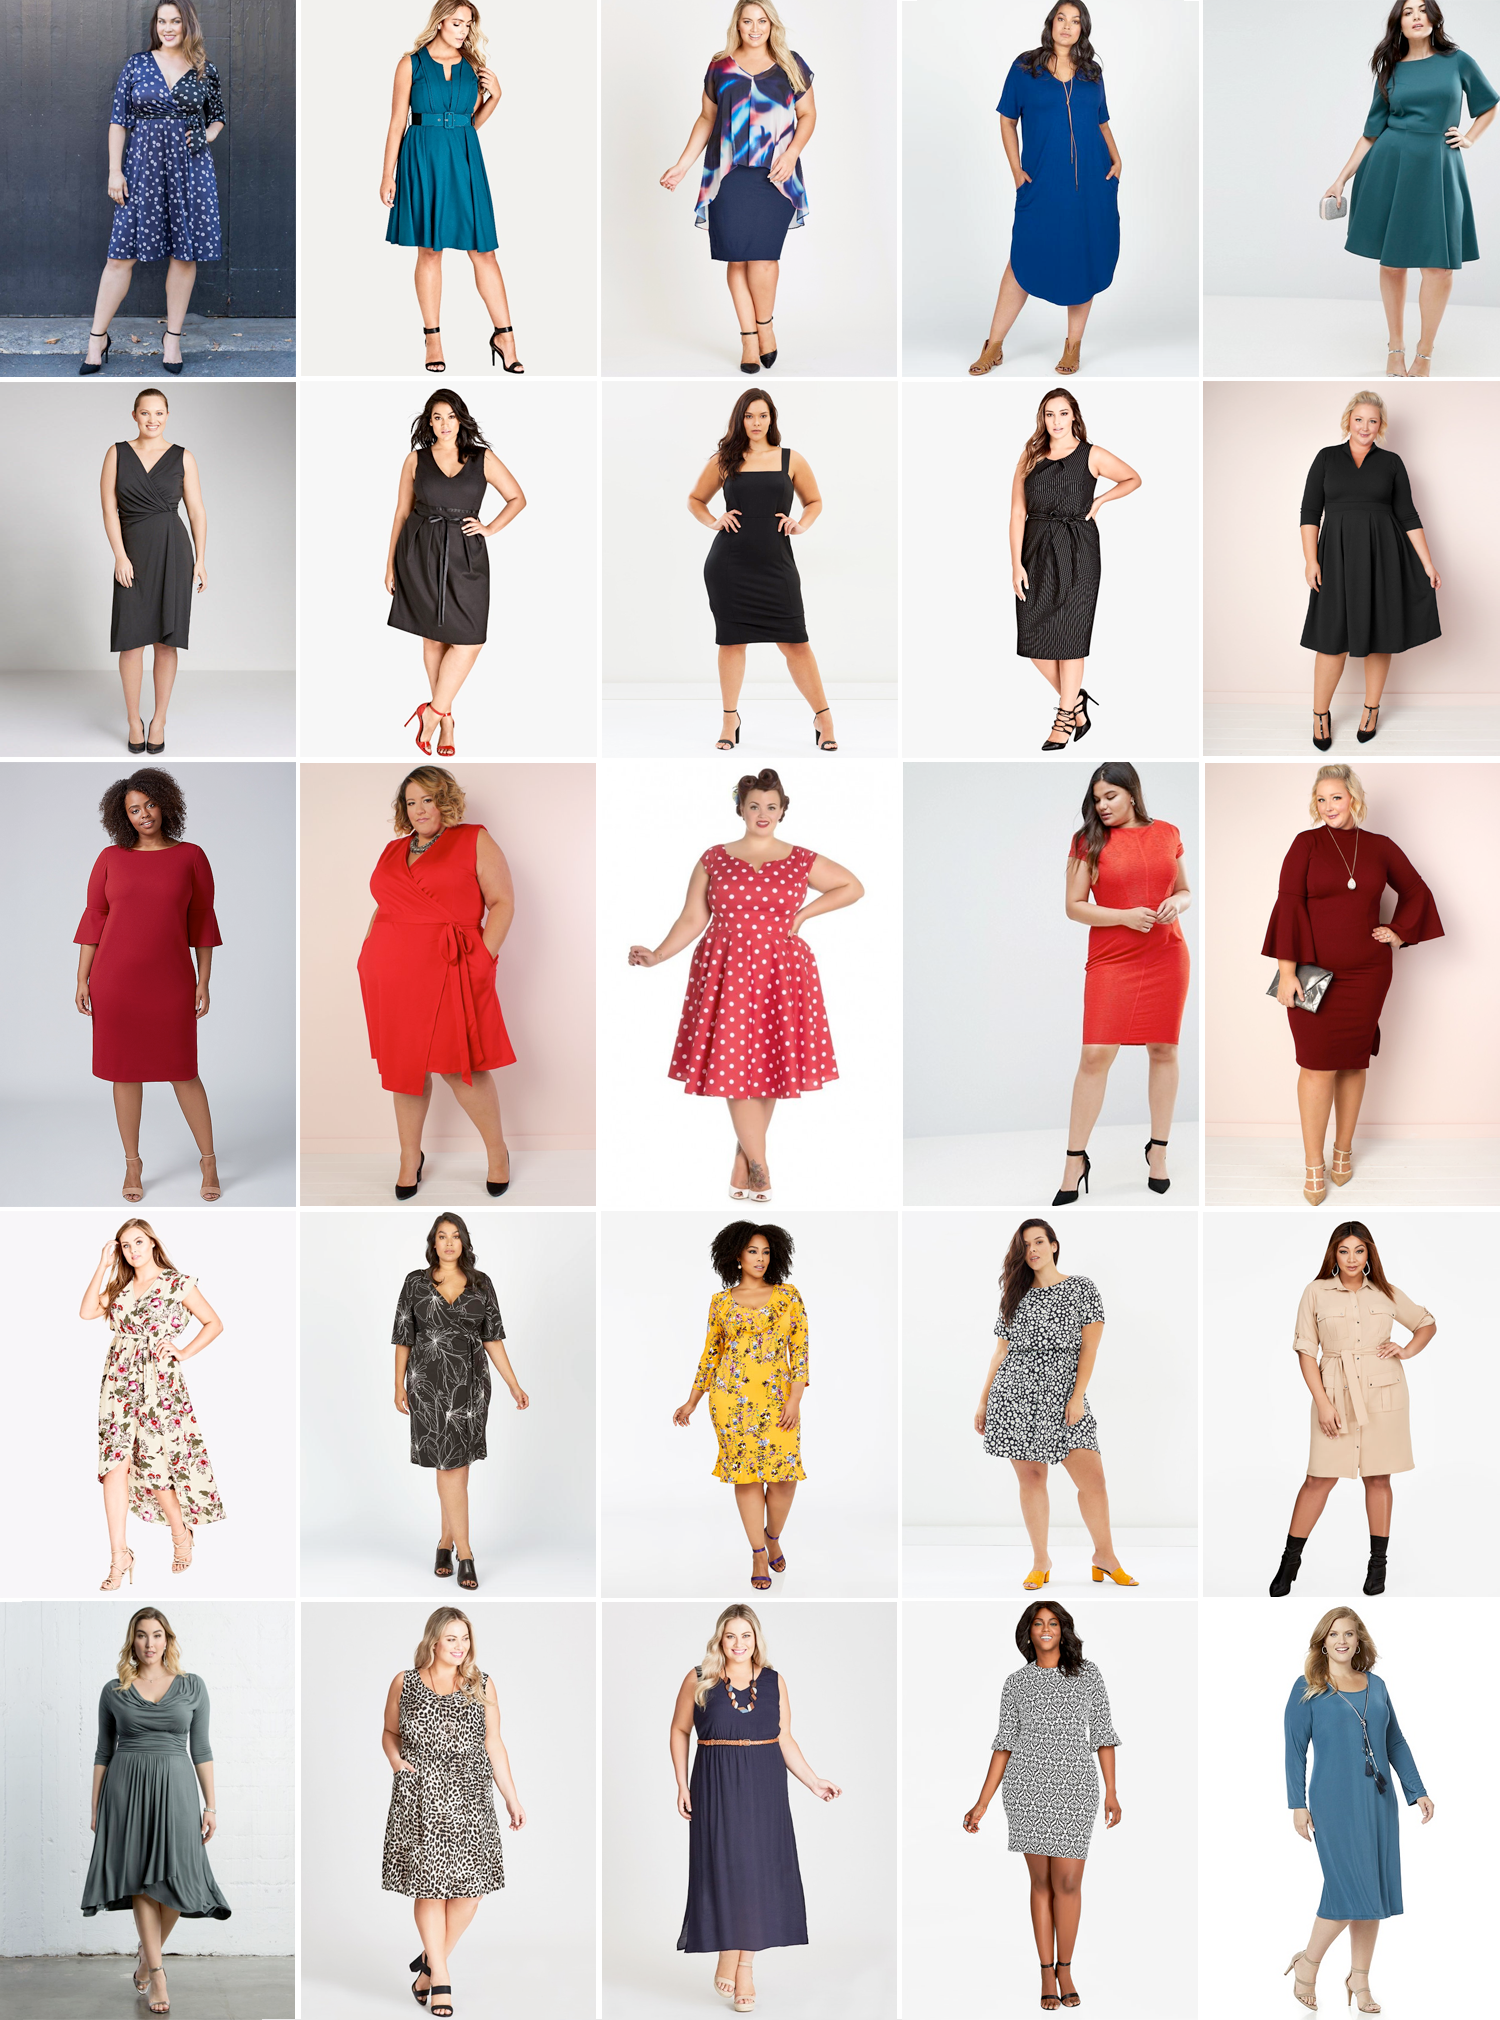 Plus size workwear dresses // Row 1 L-R: Aria Tie Dress, USD $98.00 from Kiyonna; Vintage Veronica Dress, $109.99 from City Chic; Fiesta Print Overlay Dress, $129.99 from Autograph; Don't Be Cruel Maxi Dress, AUD $199.00 from Harlow; Closet London Plus Kimono Sleeve Skater Dress, AUD $119.00 from ASOS. Row 2 L-R: Sara Drape Wrap Dress, $89.00 from EziBuy; Ballet Tie Dress, $149.99 from City Chic; Atmos&Here Curvy Faith Pencil Dress, AUD $69.95 from The Iconic; Aster Dress, $109.99 from City Chic; Valerie Pleated V-Neck Dress, USD $59.99 from Society+. Row 3 L-R: Bell-Sleeve Scuba Sheath Dress, USD $99.95 from Lane Bryant; The Power Wrap Dress, USD $89.99 from Society+; Hell Bunny Nicky Dress, $109.00 from Two Lippy Ladies; Closet London Plus Structured Plisse Pencil Dress, AUD $99.00 from ASOS; Bella Bodycon with Bell Sleeves, USD $49.99 from Society+. Row 4 L-R: Lolita Wrap Maxi Dress, $149.99 from City Chic; Siren Wrap Dress, AUD $259.00 from Harlow; Ruffle Neck Floral Print Dress, USD $29.70 from Ashley Stewart; Atmos&Here Curvy Francis Shift Dress, AUD $59.95 from The Iconic; Belted Button Front Safari Dress, USD $32.70 from Ashley Stewart. Row 5 L-R: Draped in Class Dress, USD $74.99 from Kiyonna; Sleeveless Pocket Detail Dress, $54.99 from Autograph; Maxi Dress With Belt, $84.99 from Autograph; Bell Sleeve Print Sheath Dress, USD $32.70 from Ashley Stewart; Sleek Stretch All-Day Dress and Necklace Set, $119.00 from Catherines